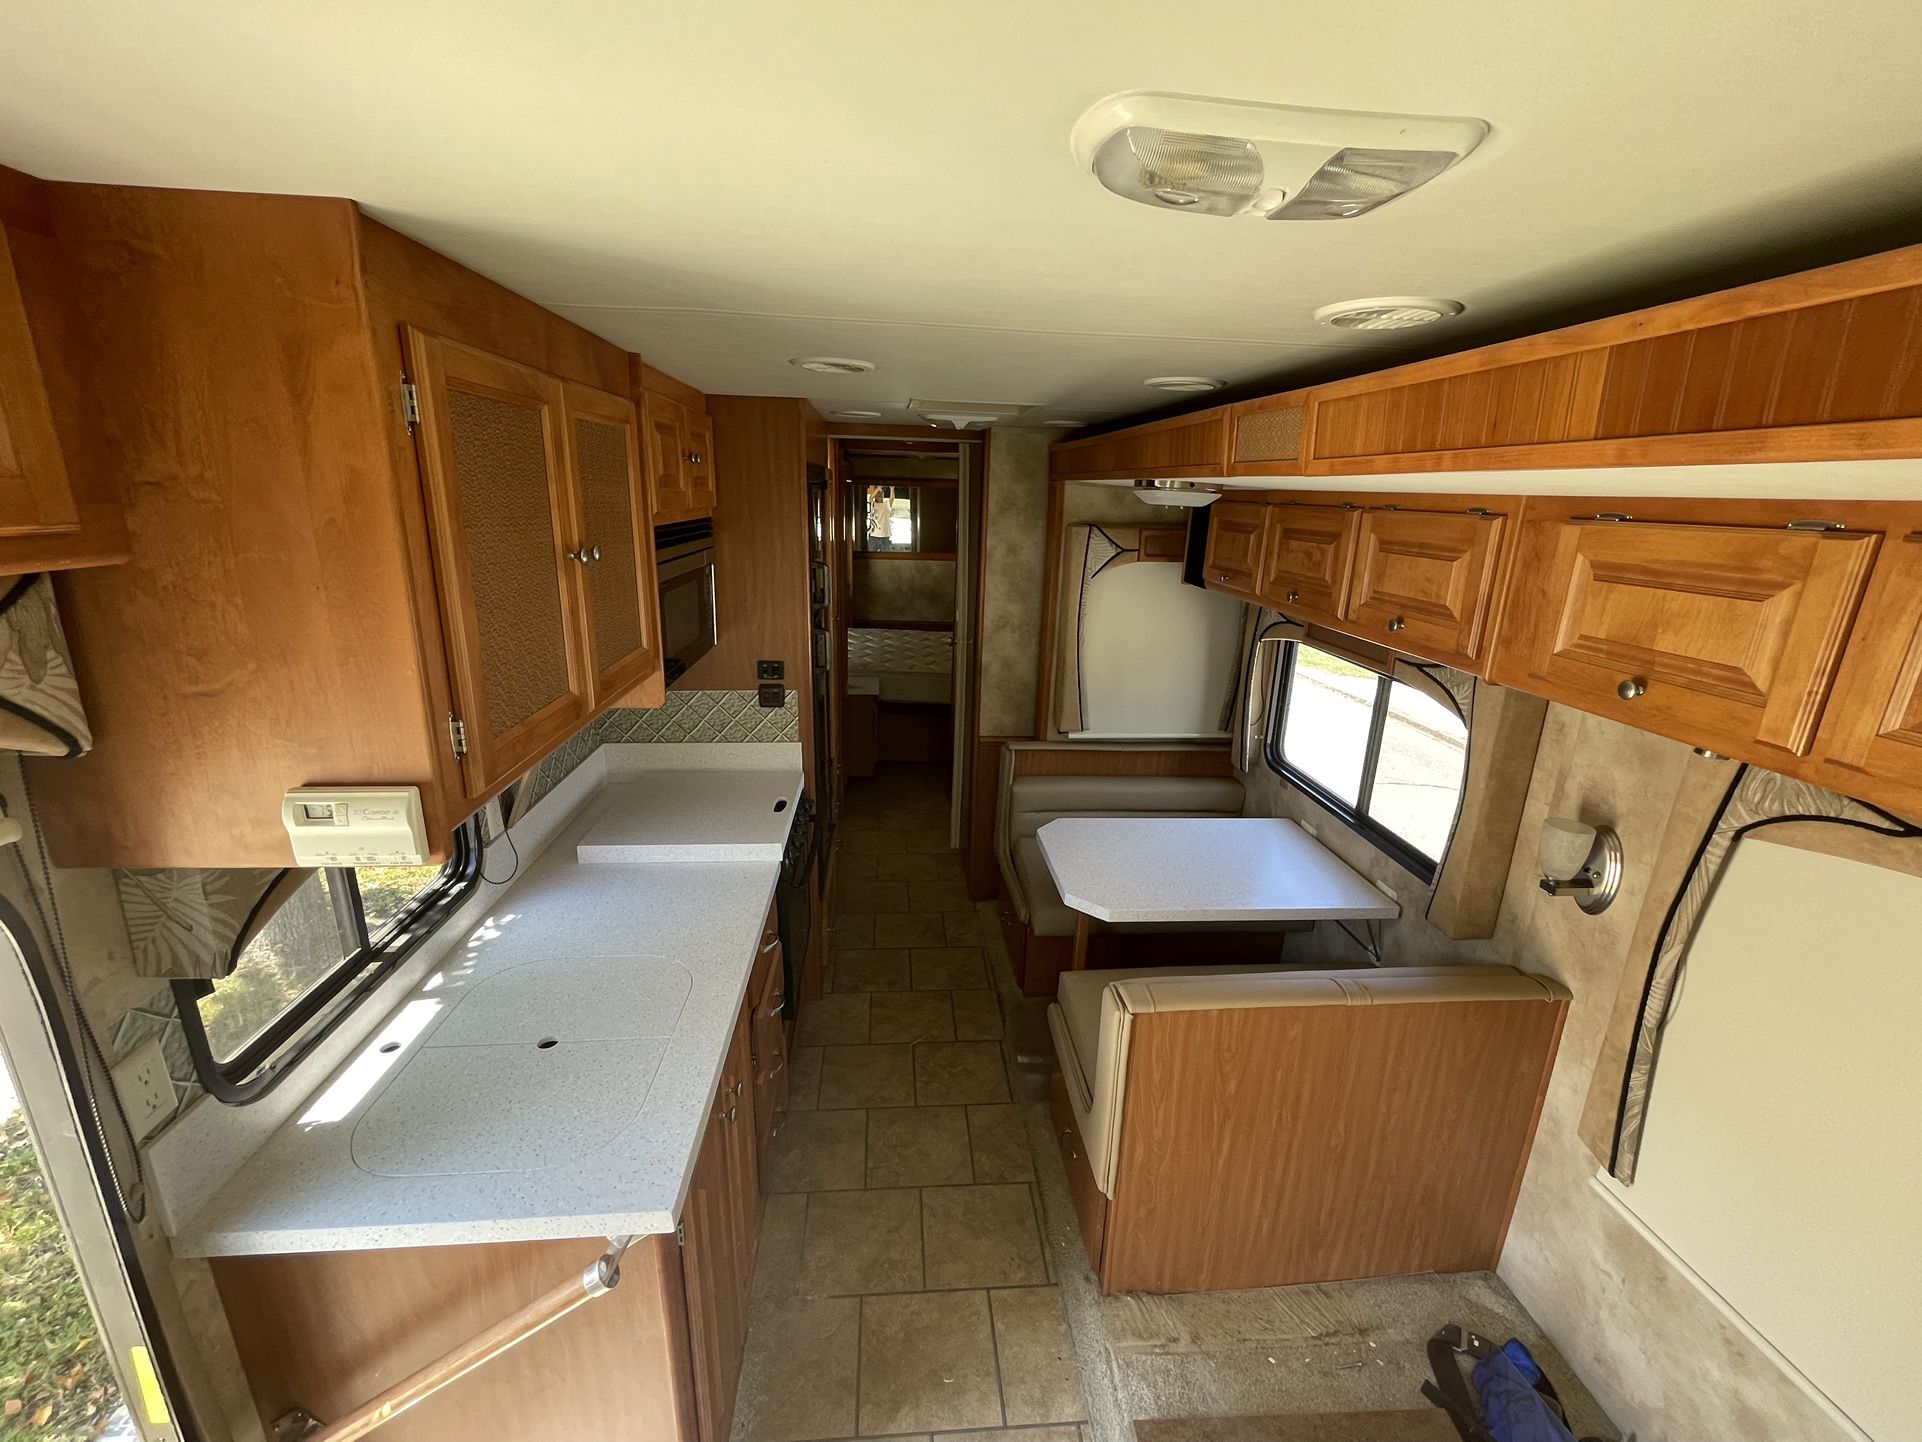 Solid Surfaces for RV, Boat, and Trailers (Free Estimates)